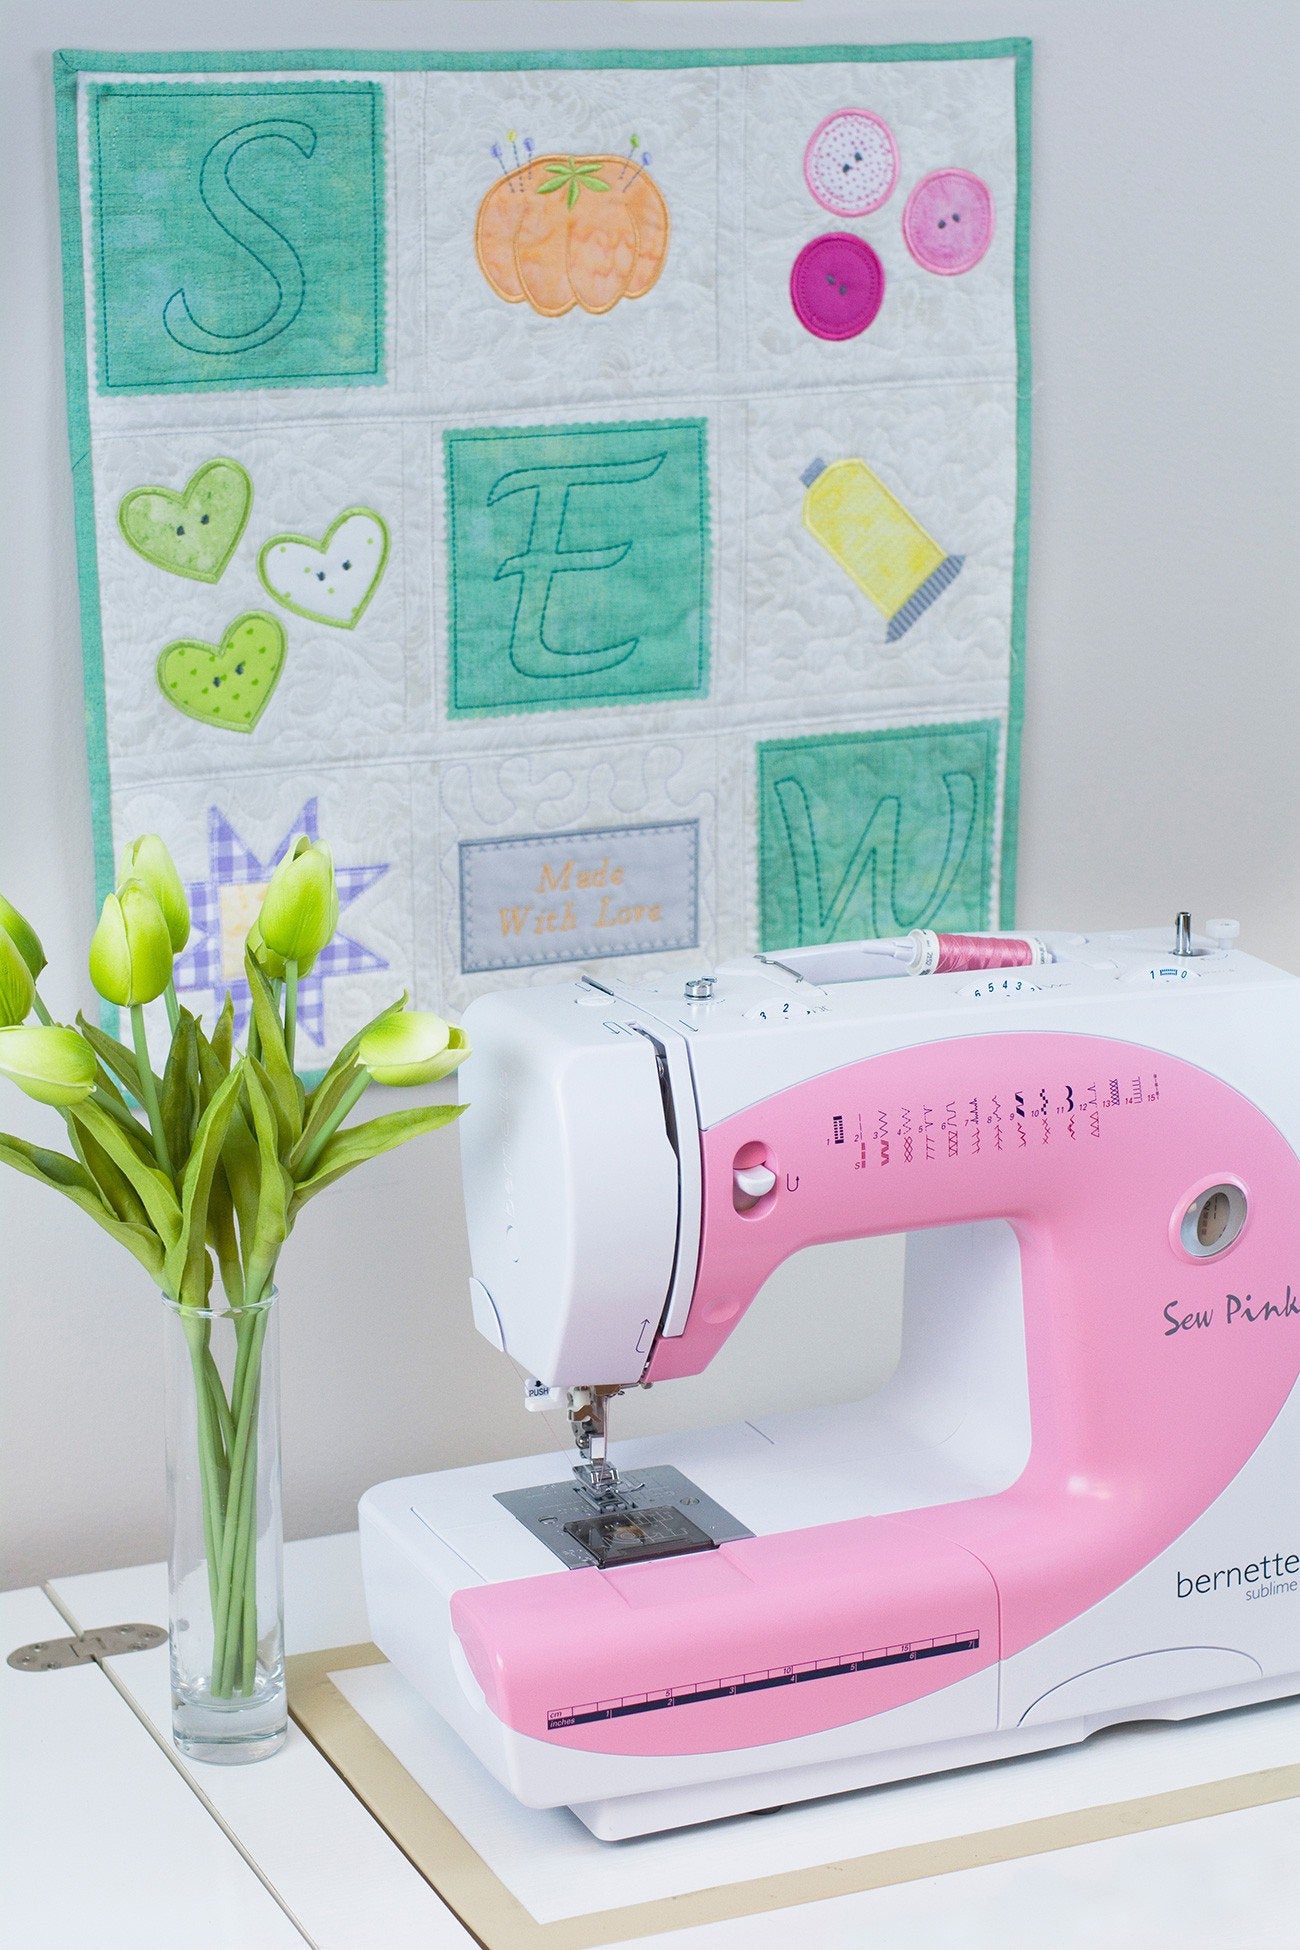 Build-A-Quilt On Your Embroidery Machine by Amelie Scott